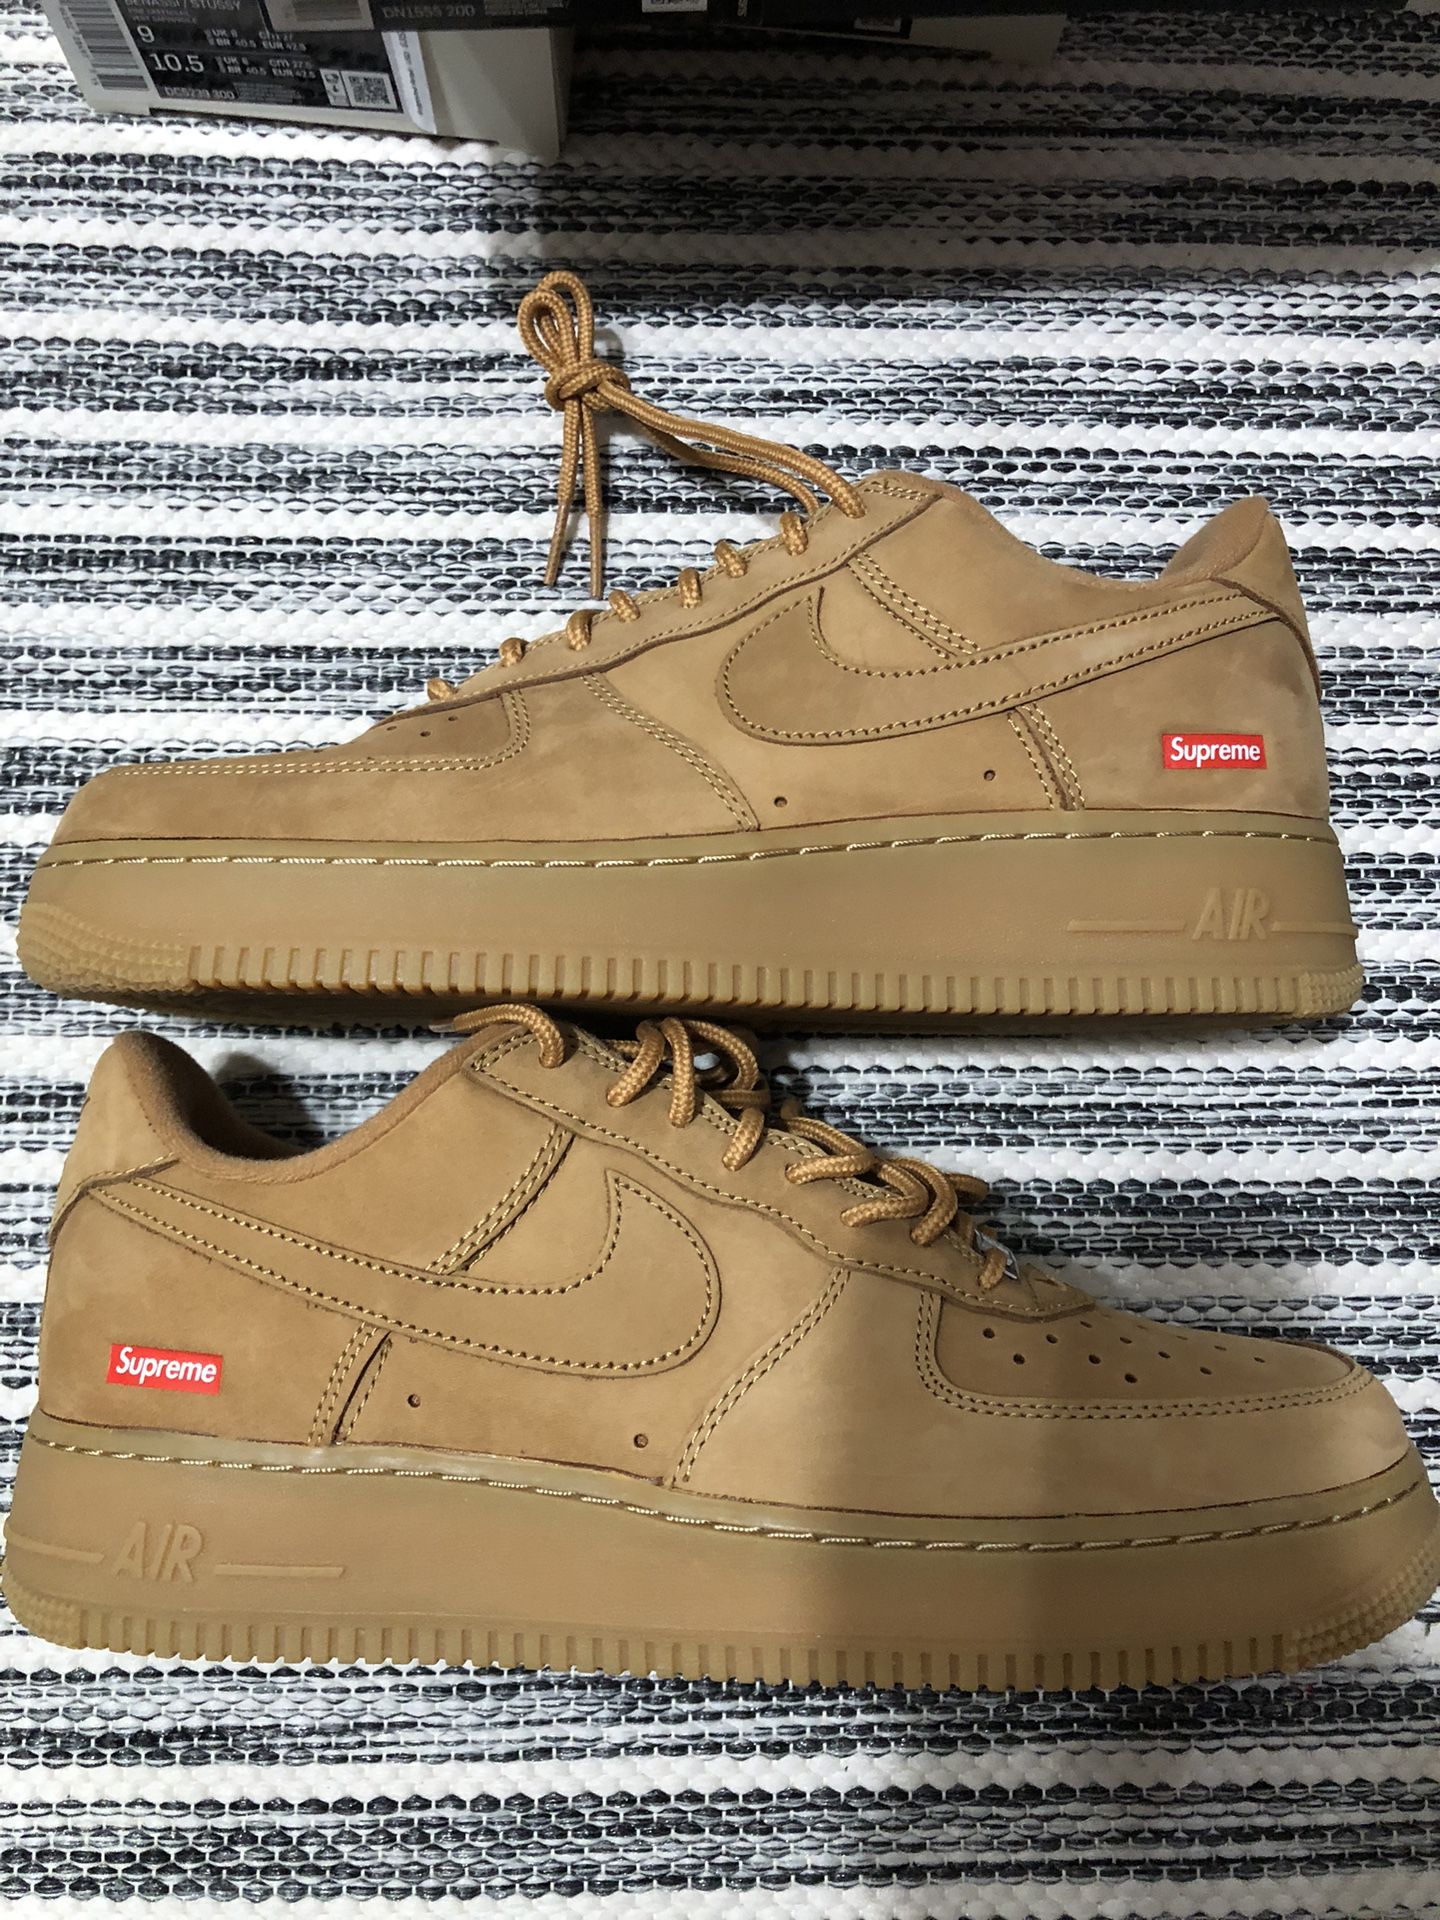 Supreme x Nike Air Force 1 Low Wheat Details